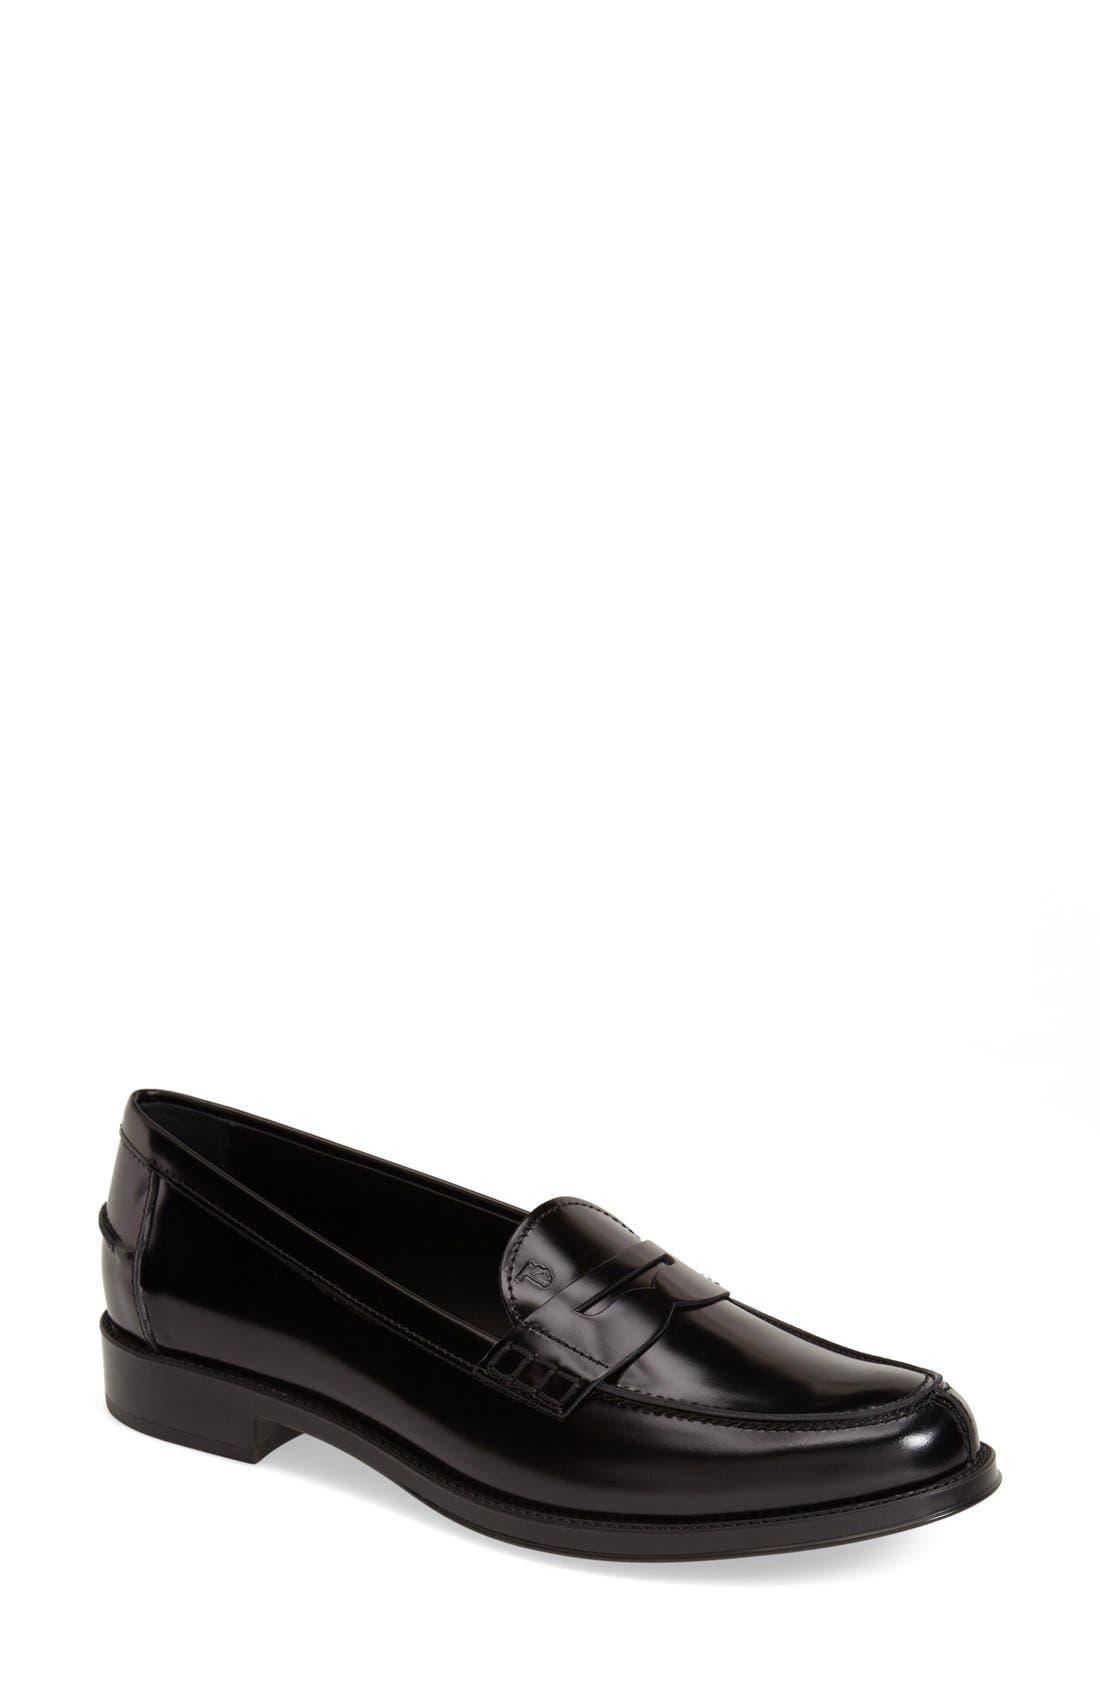 tods loafers canada